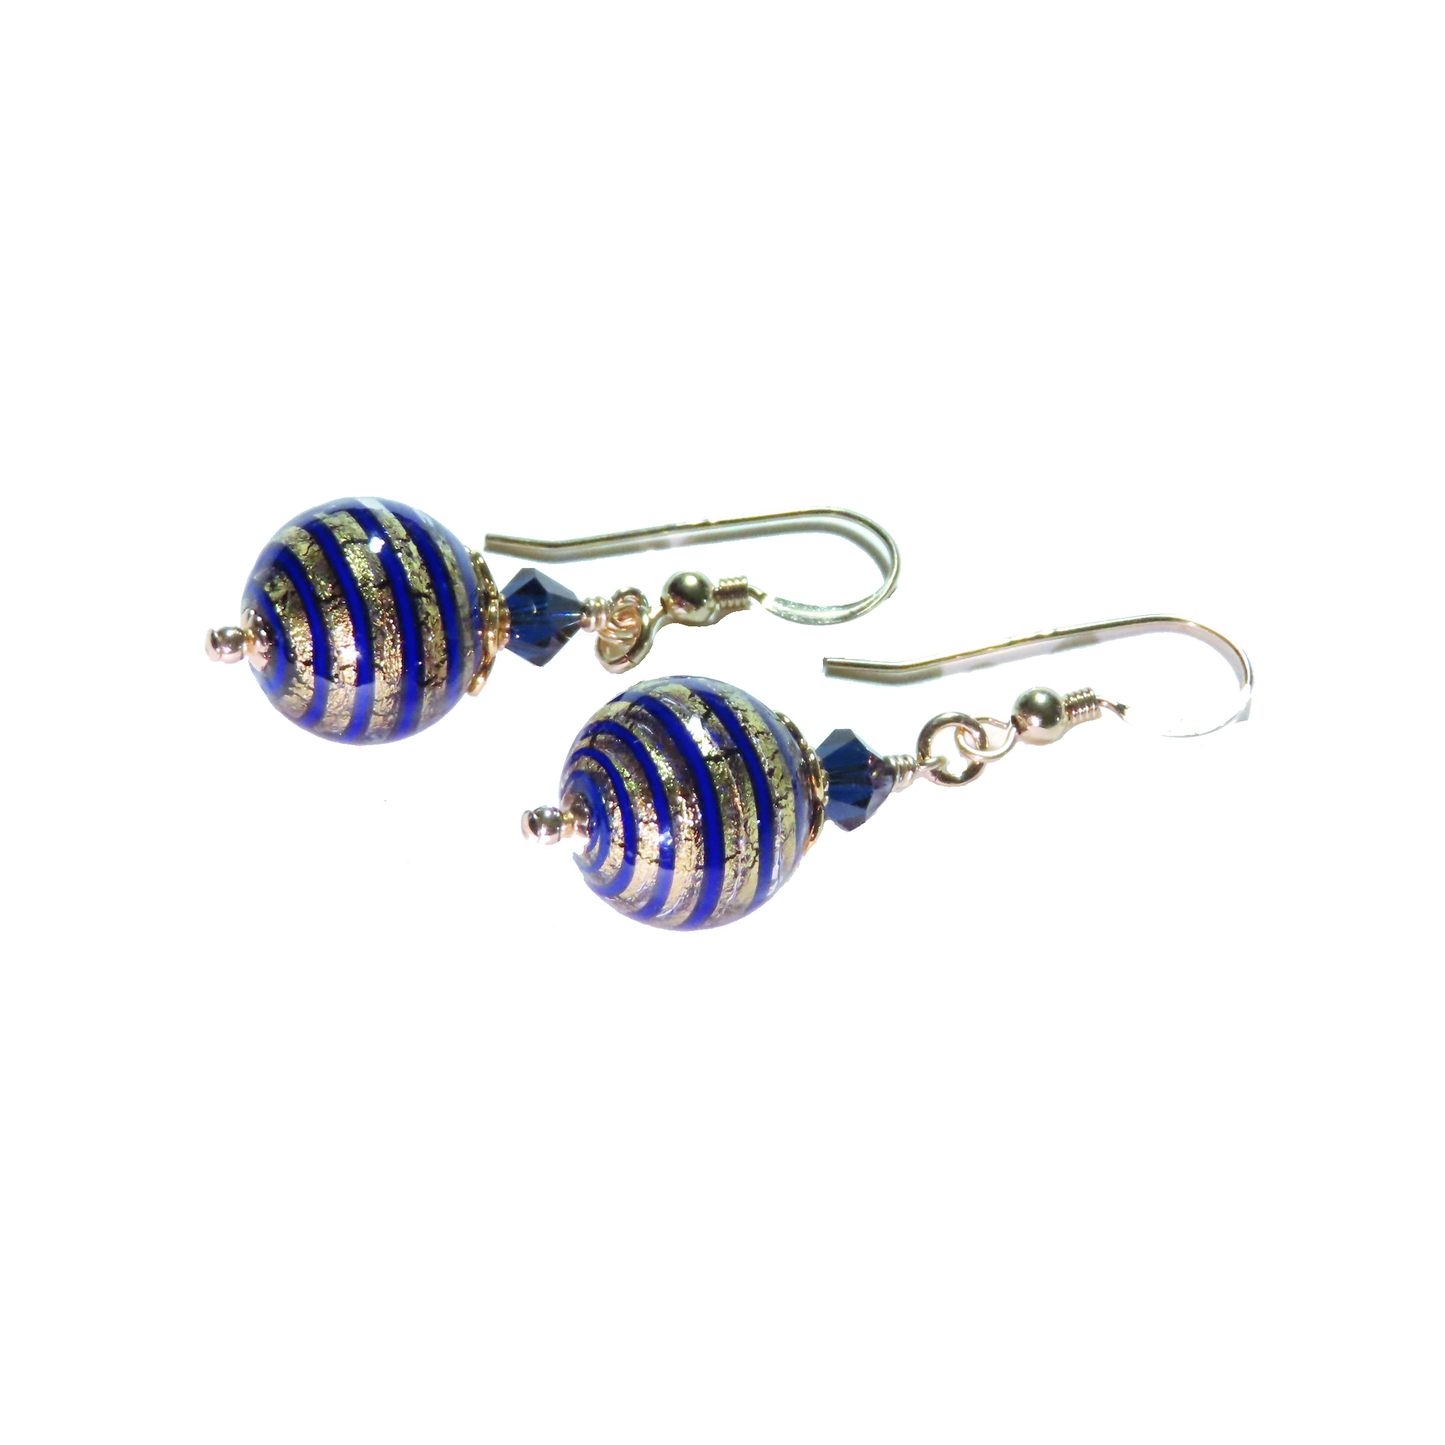 a pair of blue and silver earrings on a white background